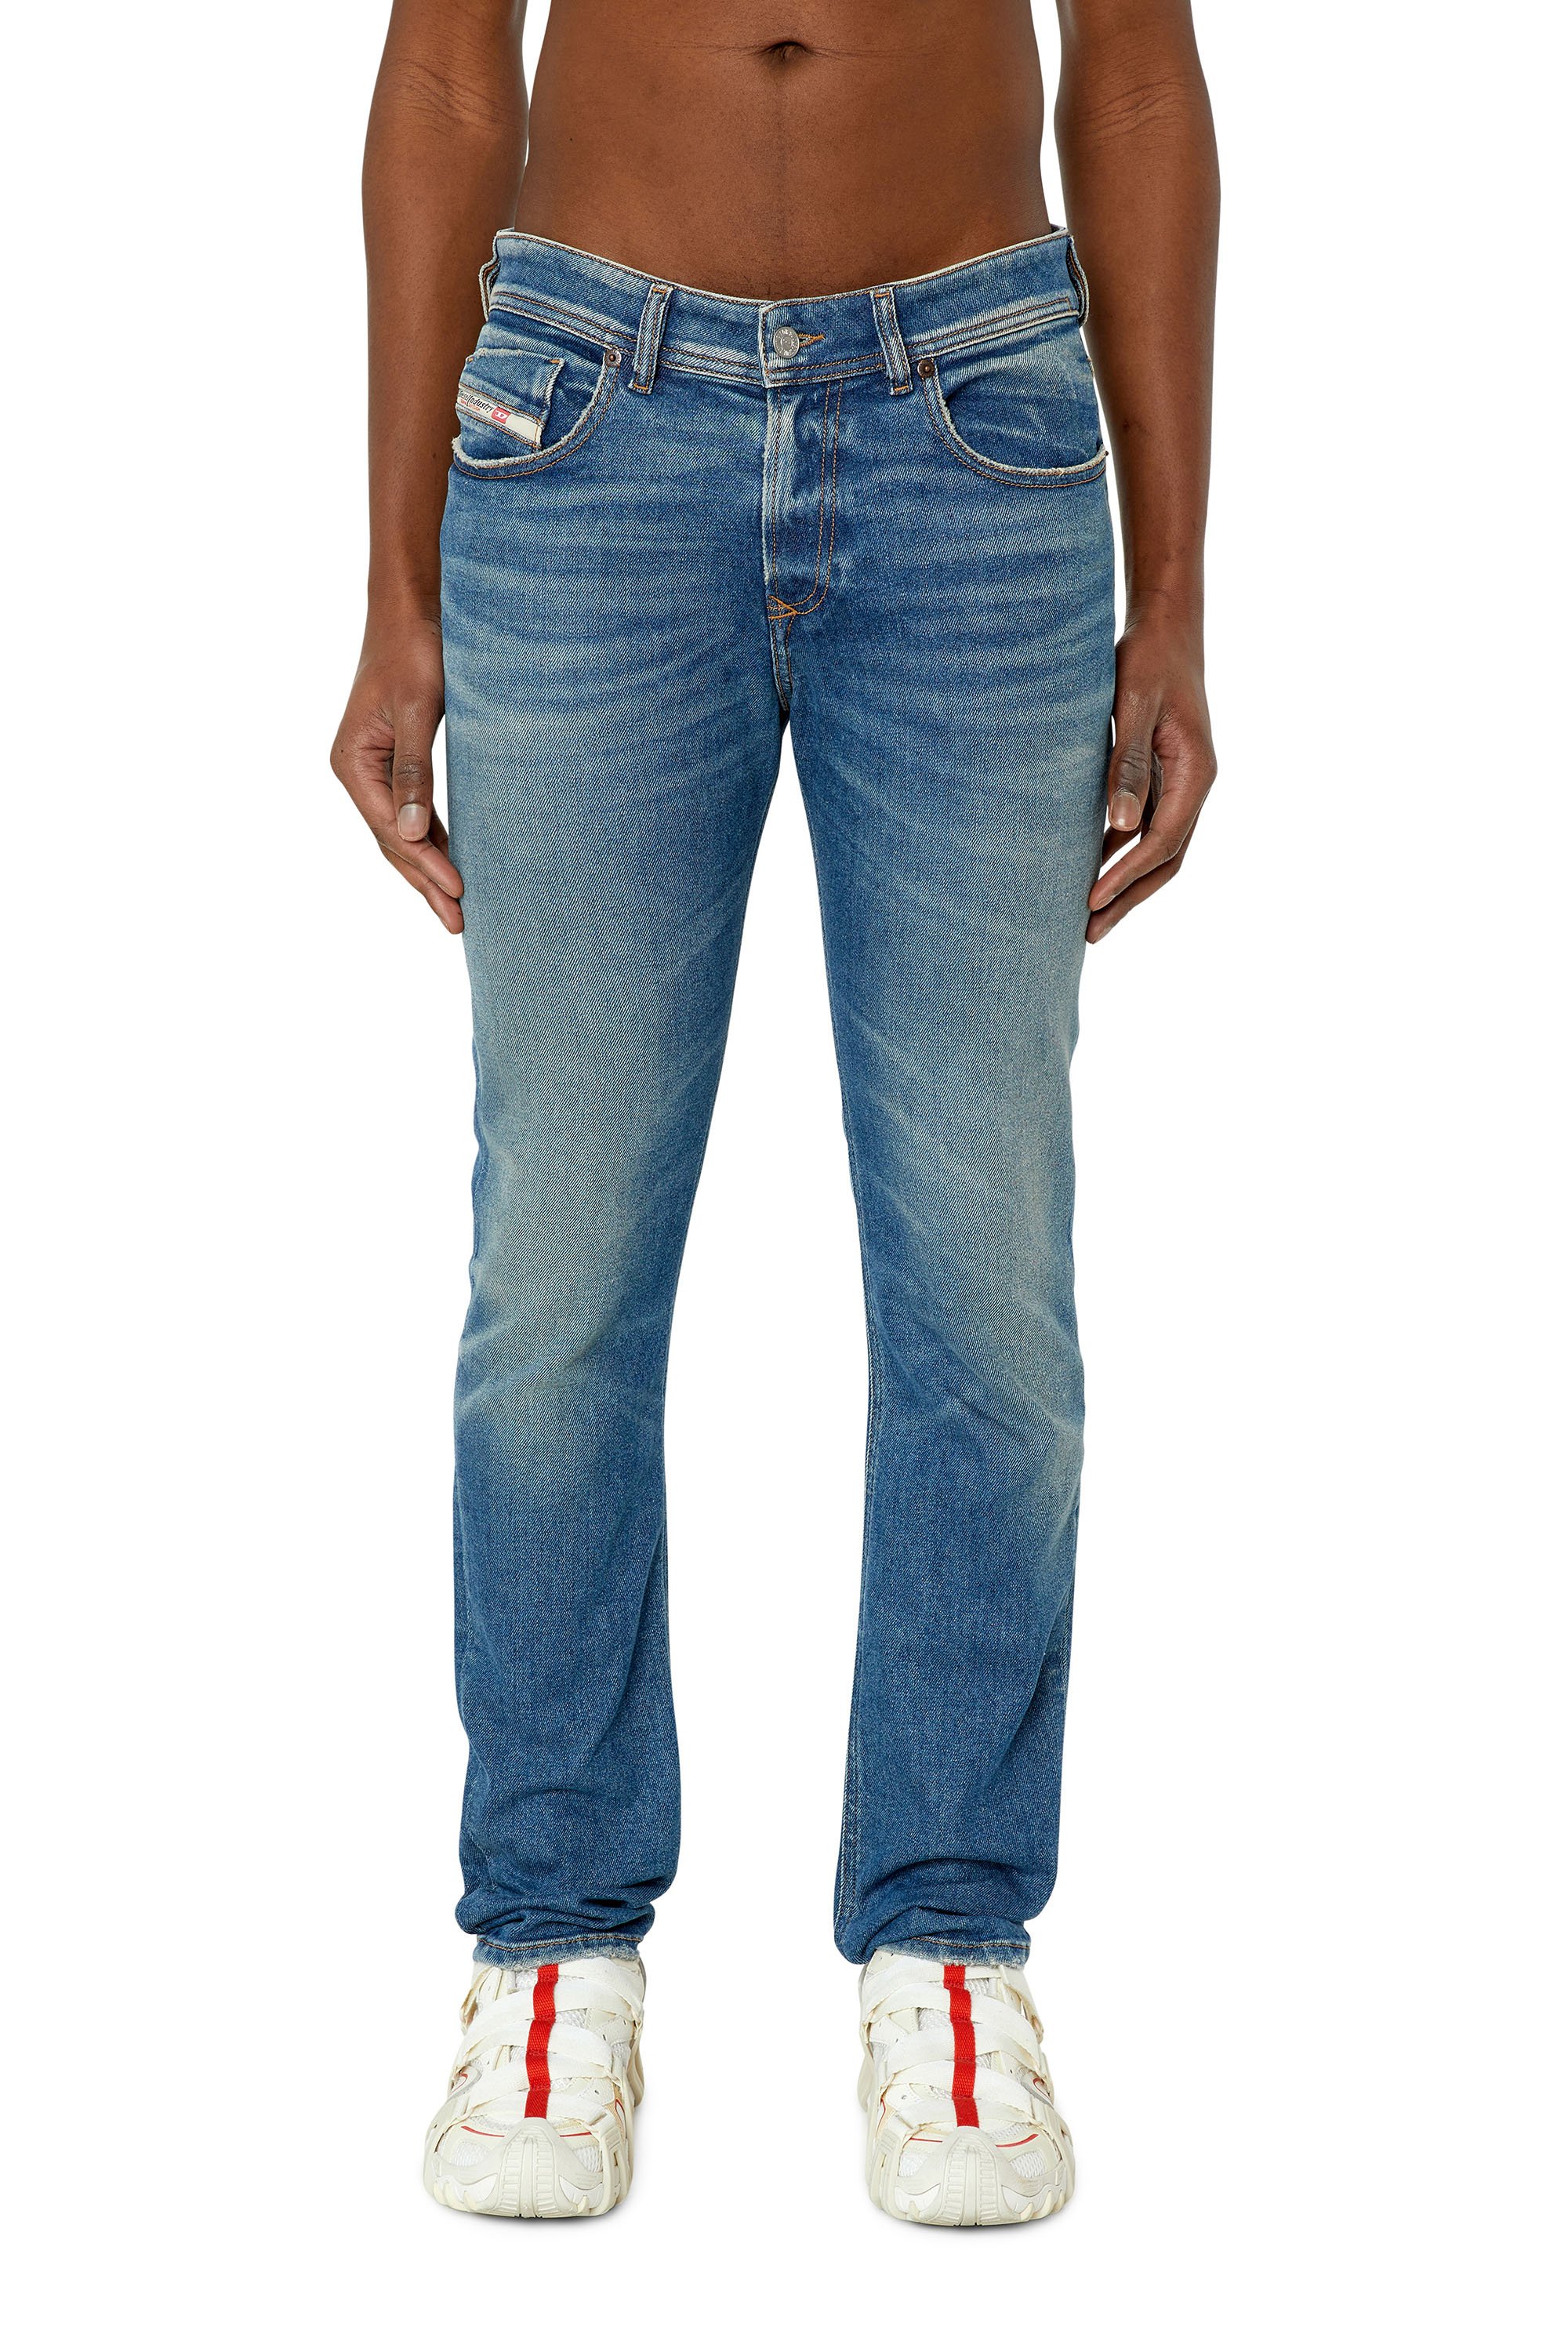 Men's New Arrival Jeans: Clean Wash, Printed and Treated Denim for